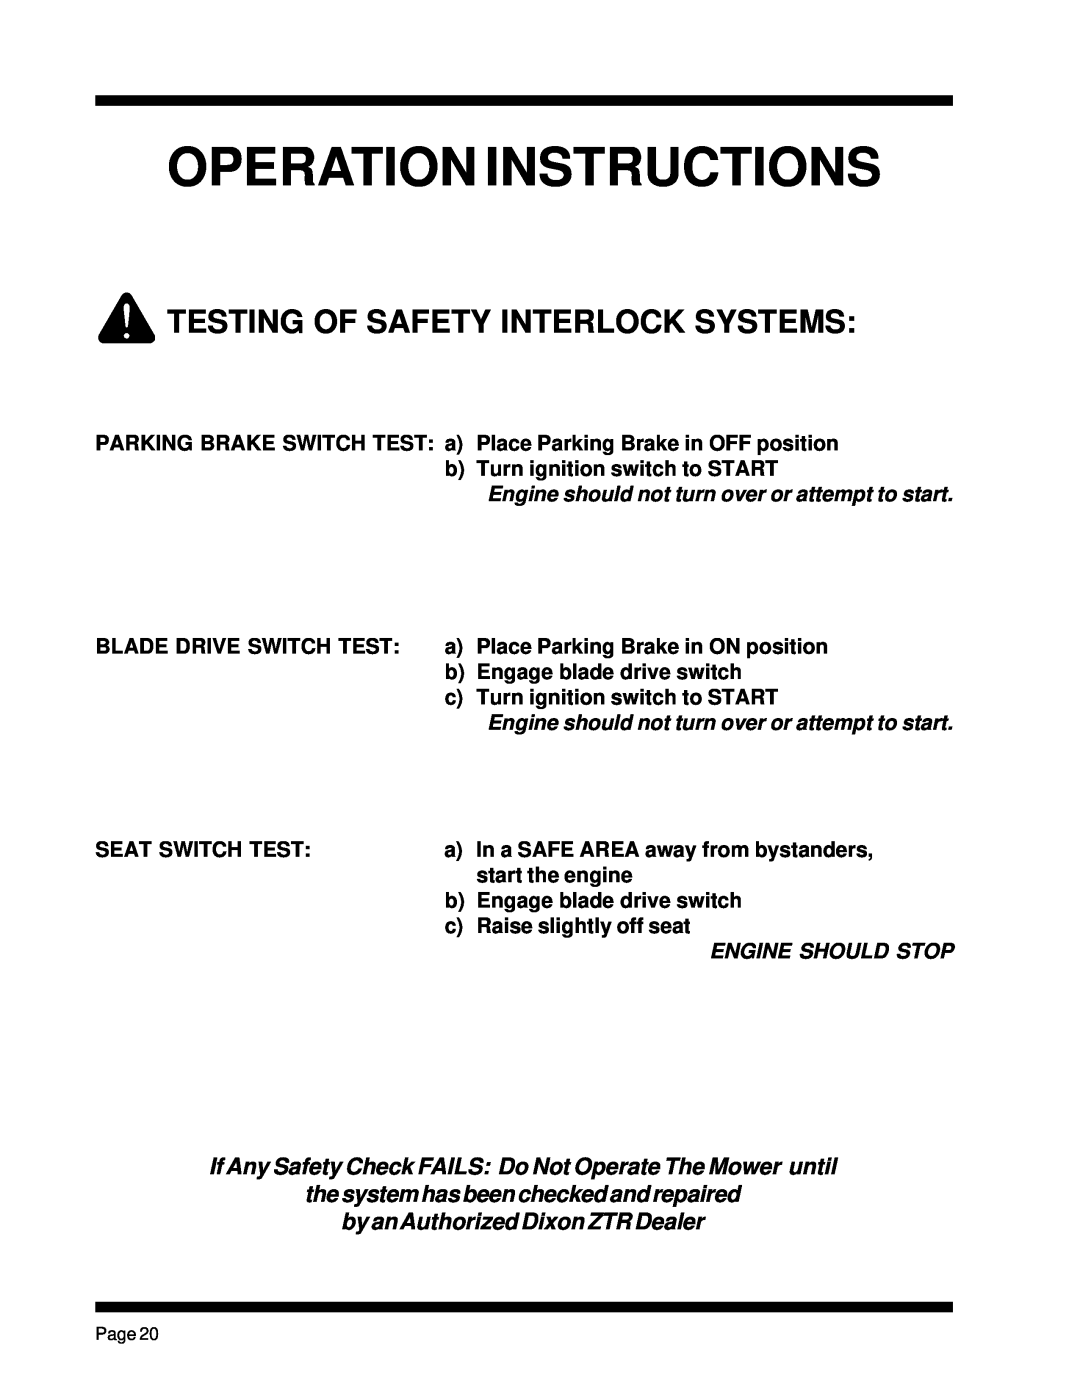 Dixon ZTR 5023, ZTR 5425 Testing Of Safety Interlock Systems, Operation Instructions, thesystemhasbeencheckedandrepaired 